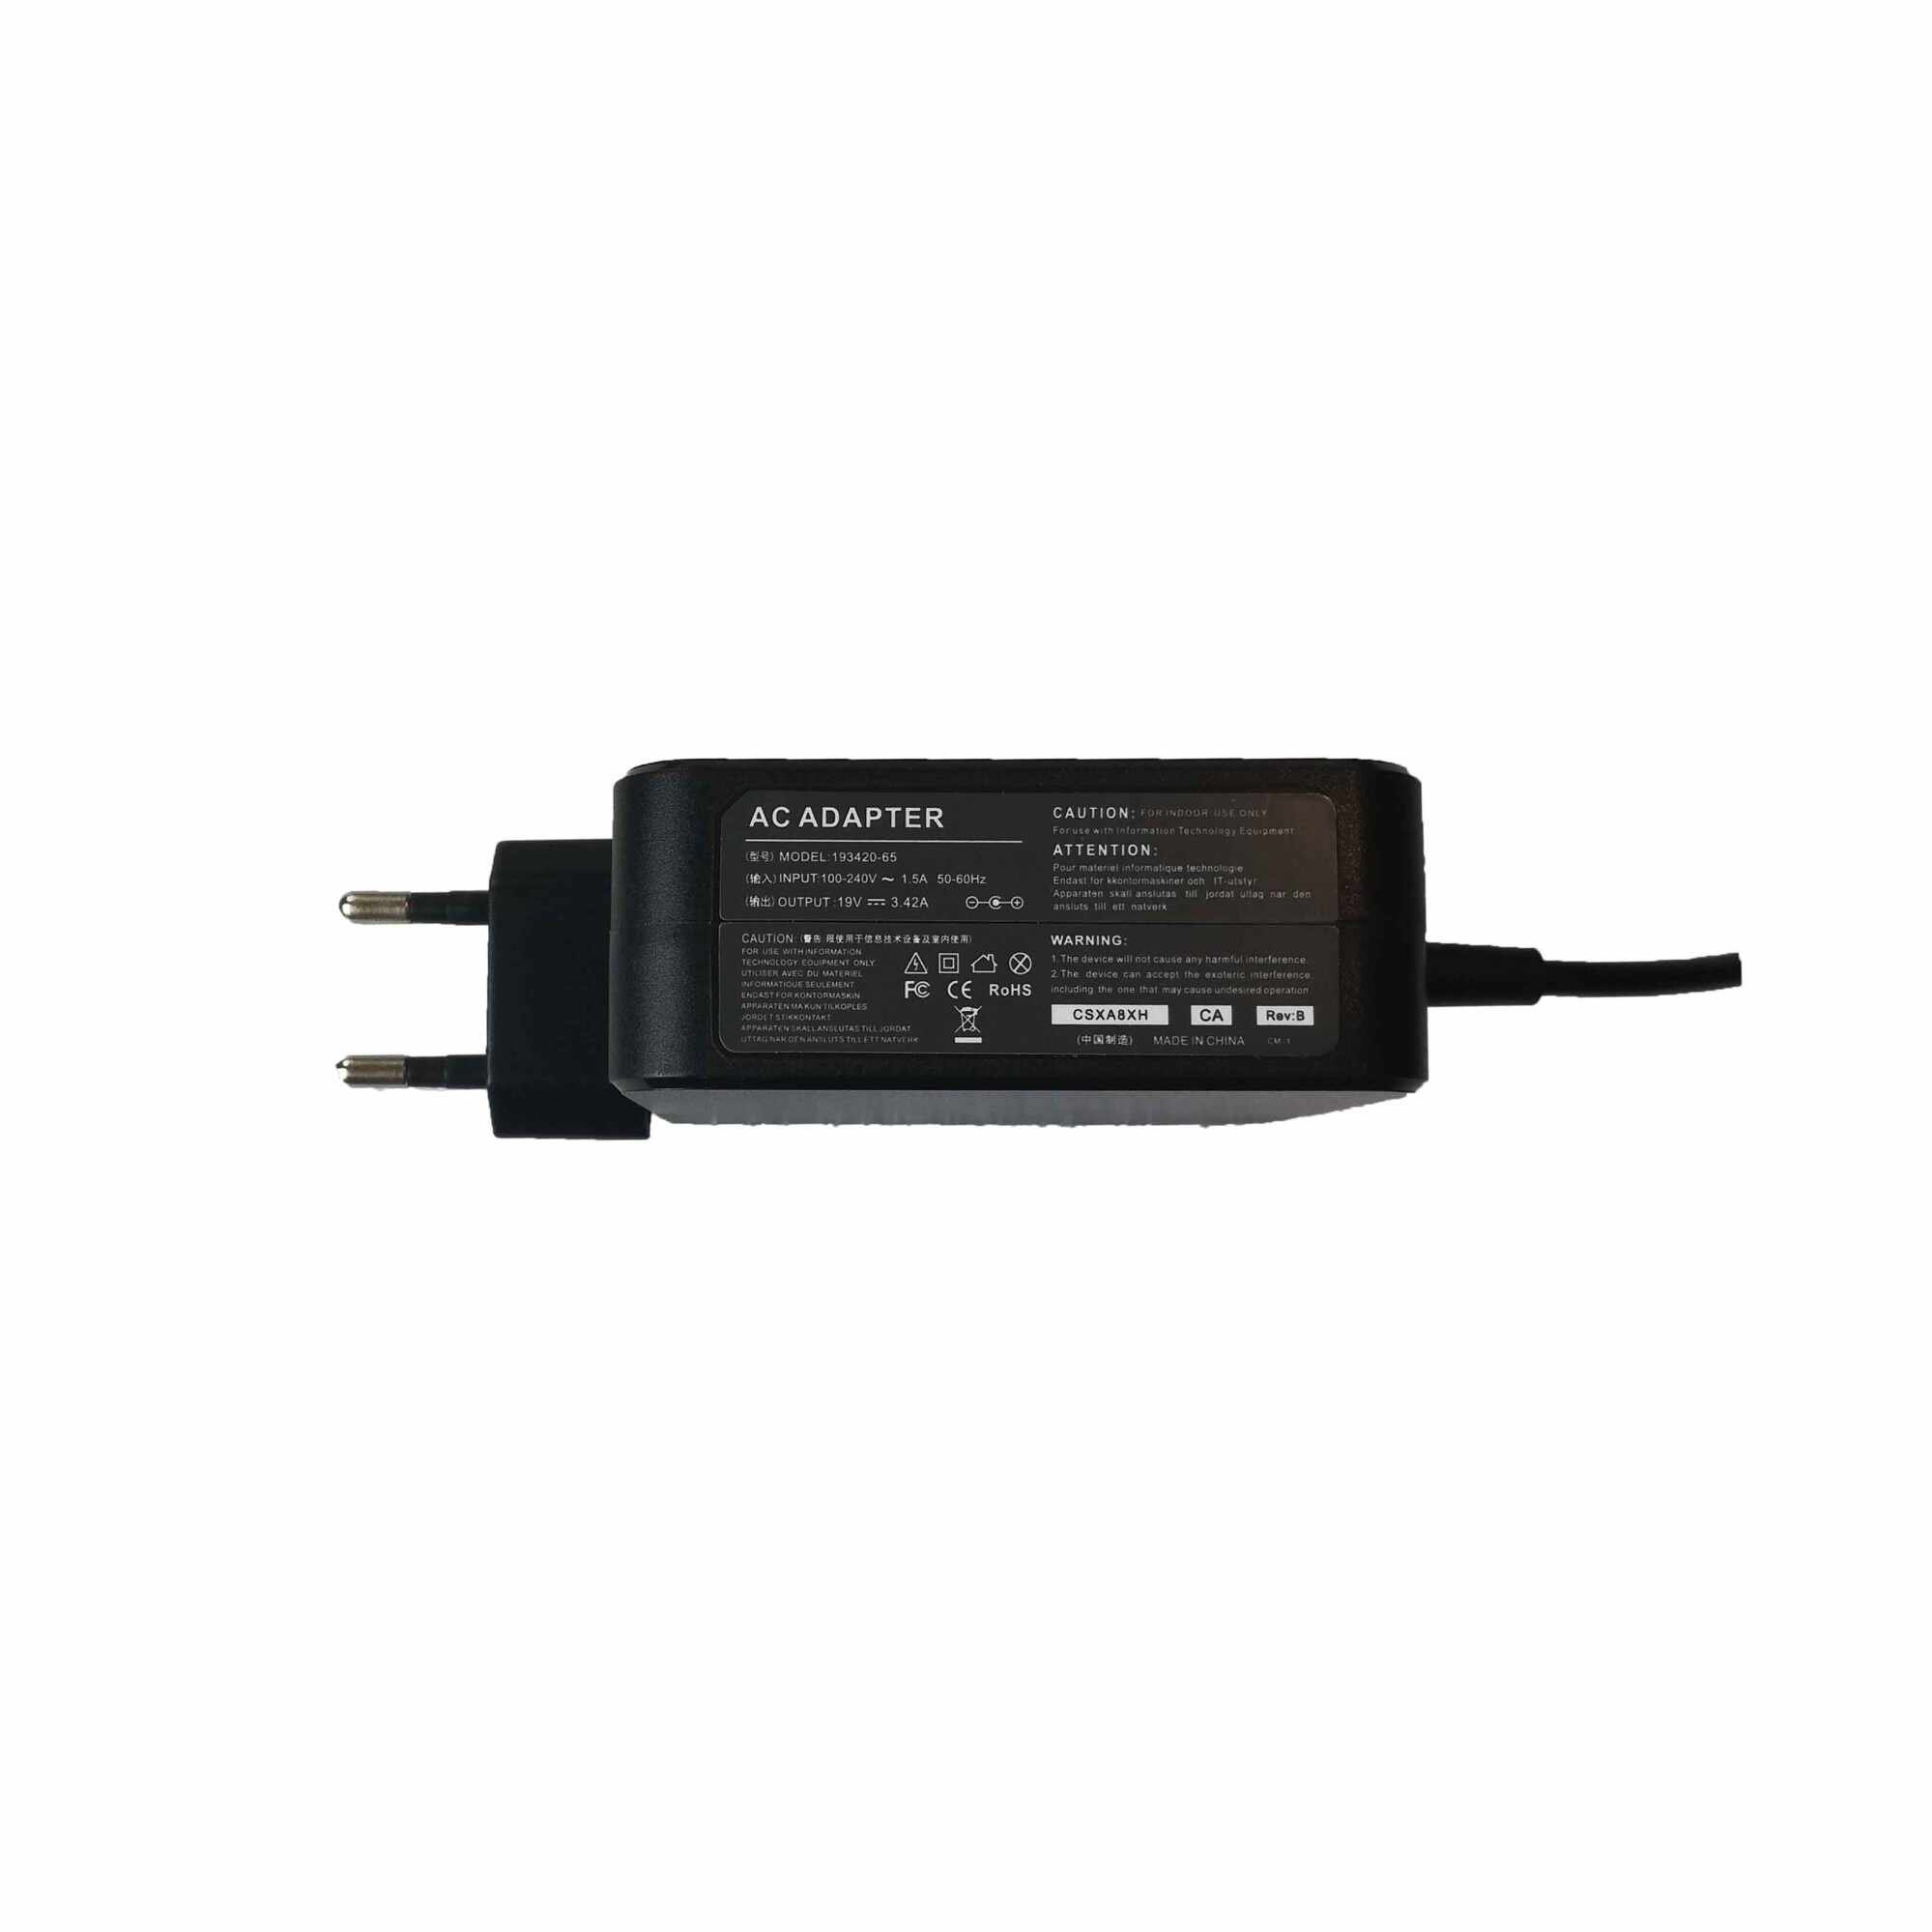 Incarcator laptop compatibil Asus 19V 3.42A 65W, conector 4.0x1.35mm